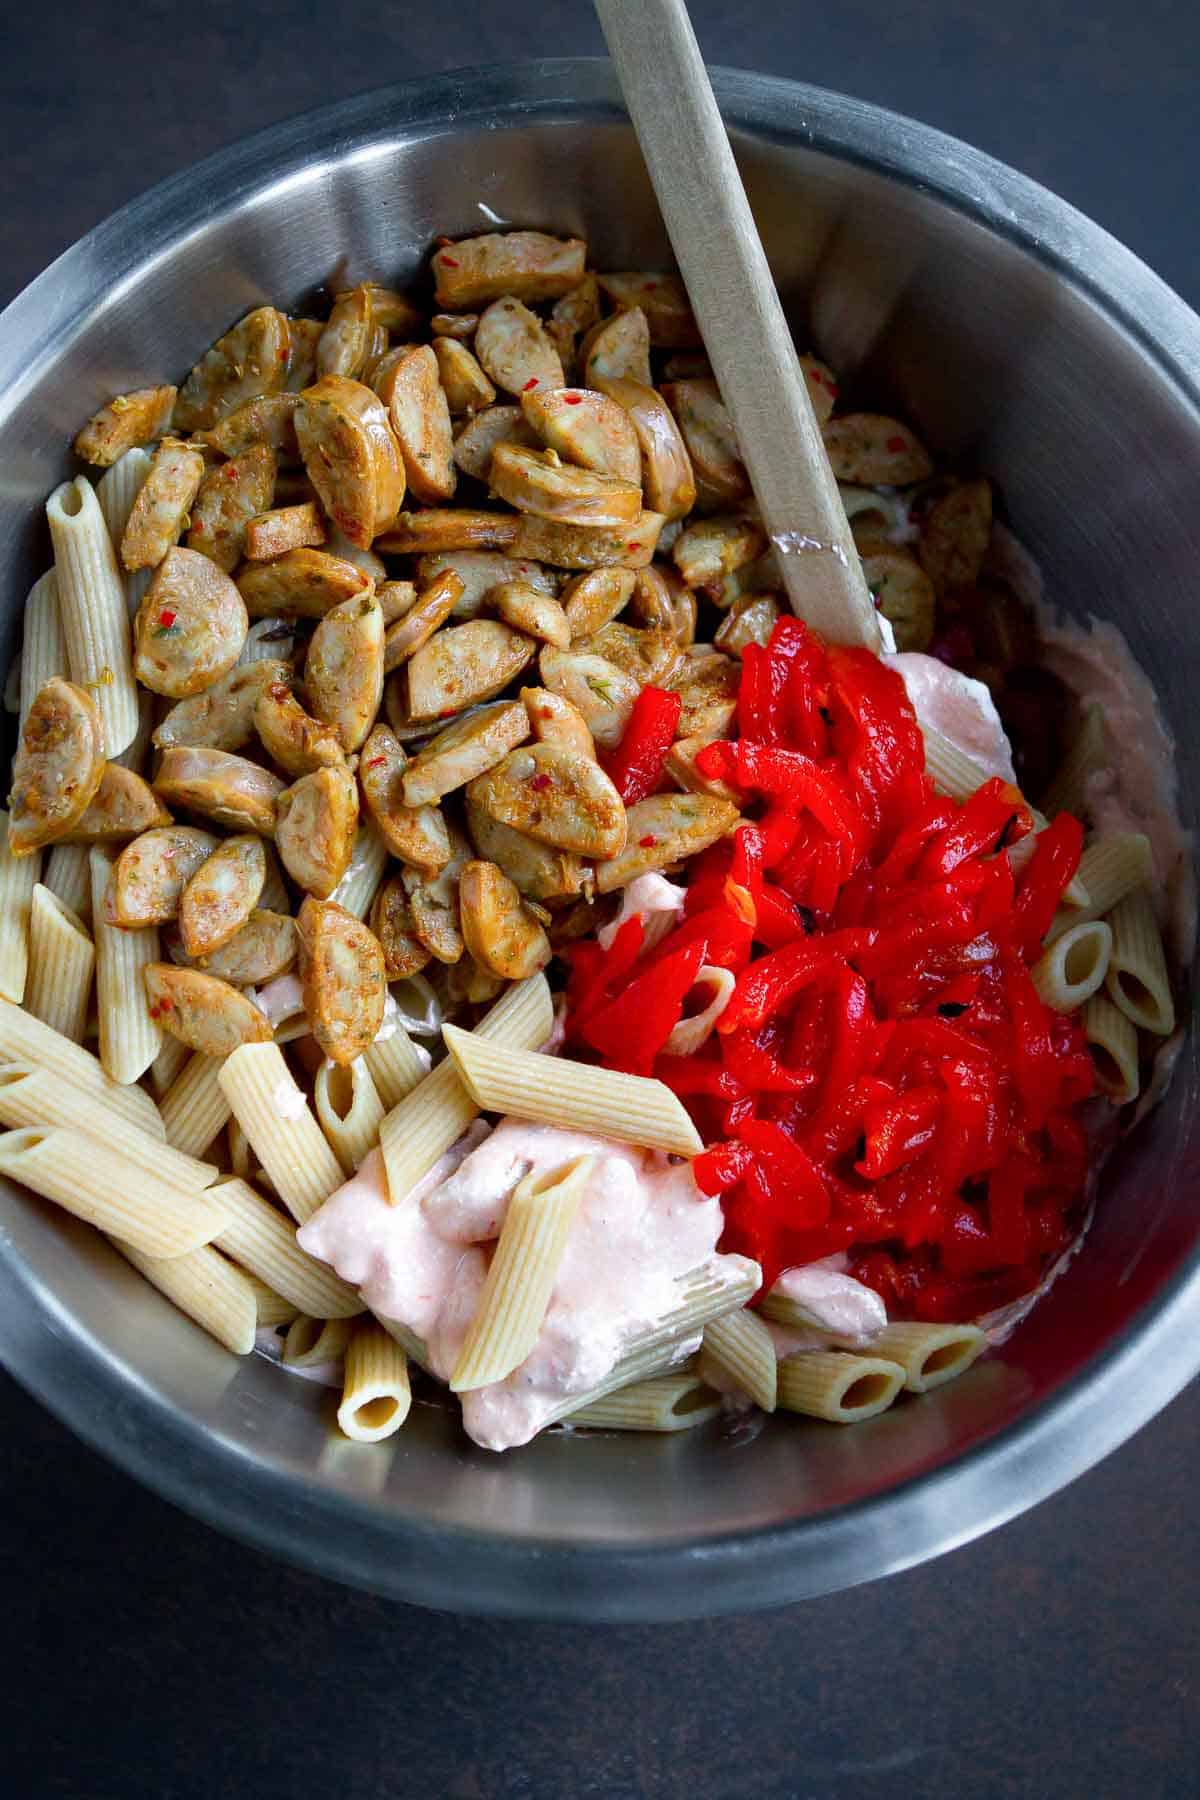 Cooked pasta, sausage and roasted peppers in a large mixing bowl.